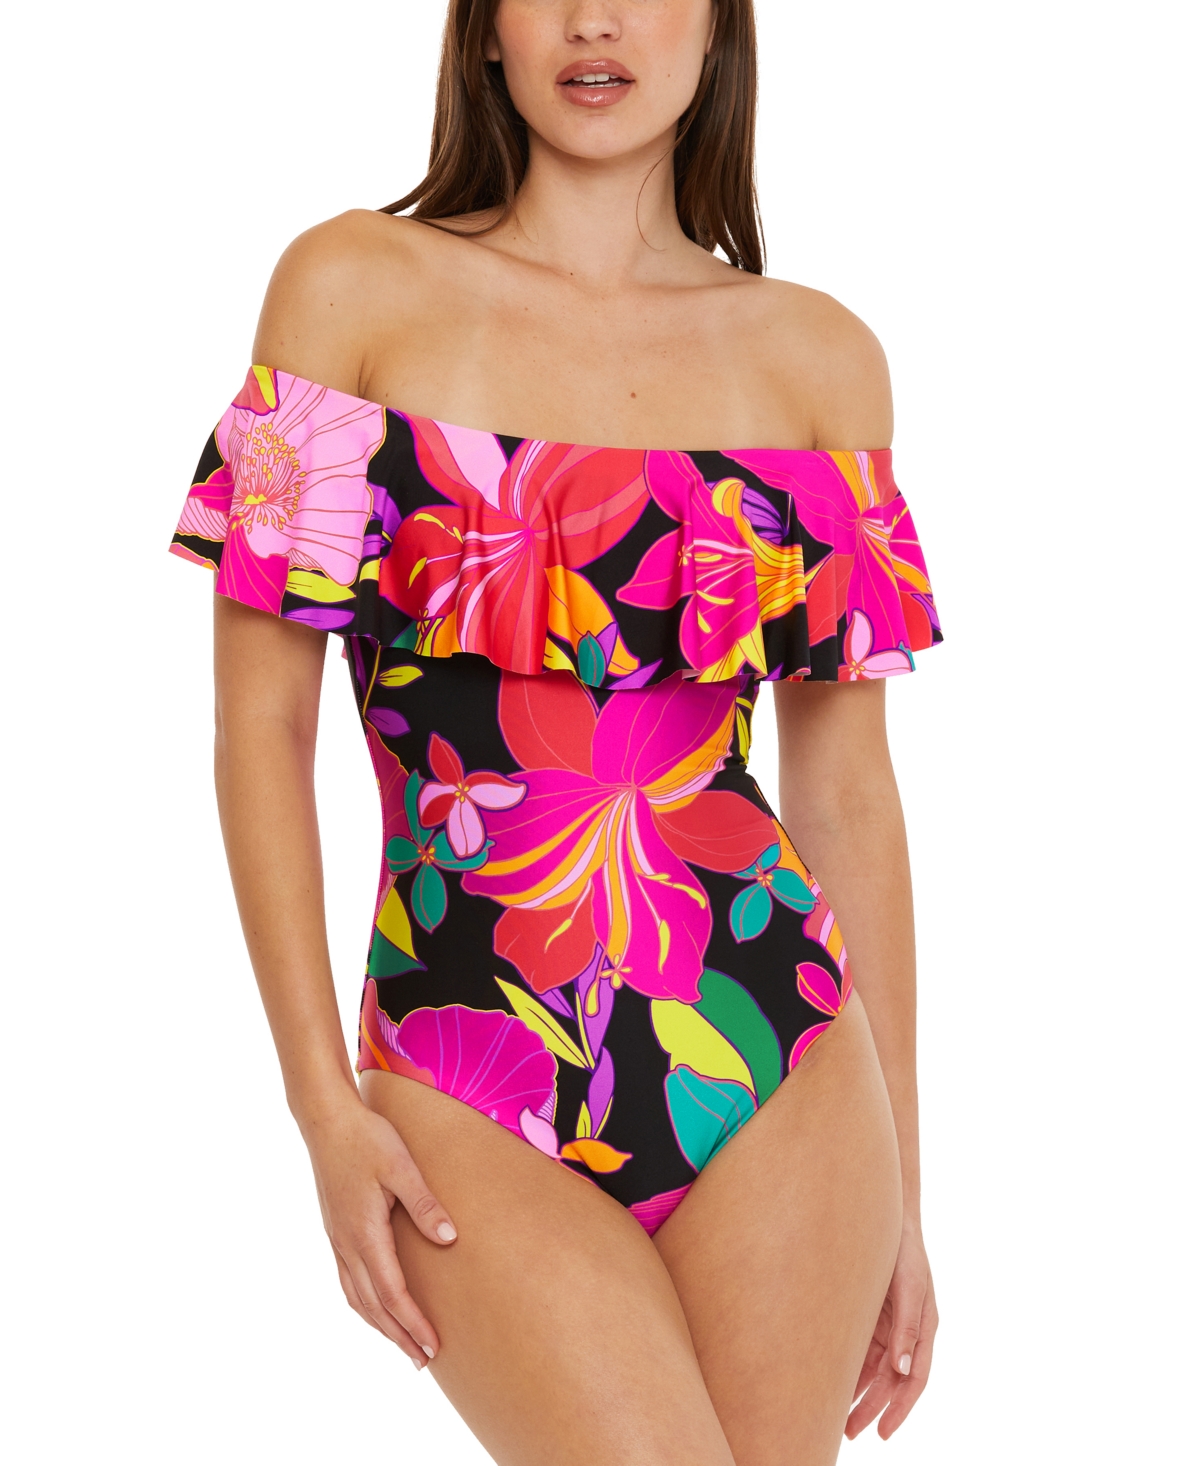 TRINA TURK WOMEN'S SOLAR FLORAL RUFFLED OFF-THE-SHOULDER ONE-PIECE SWIMSUIT